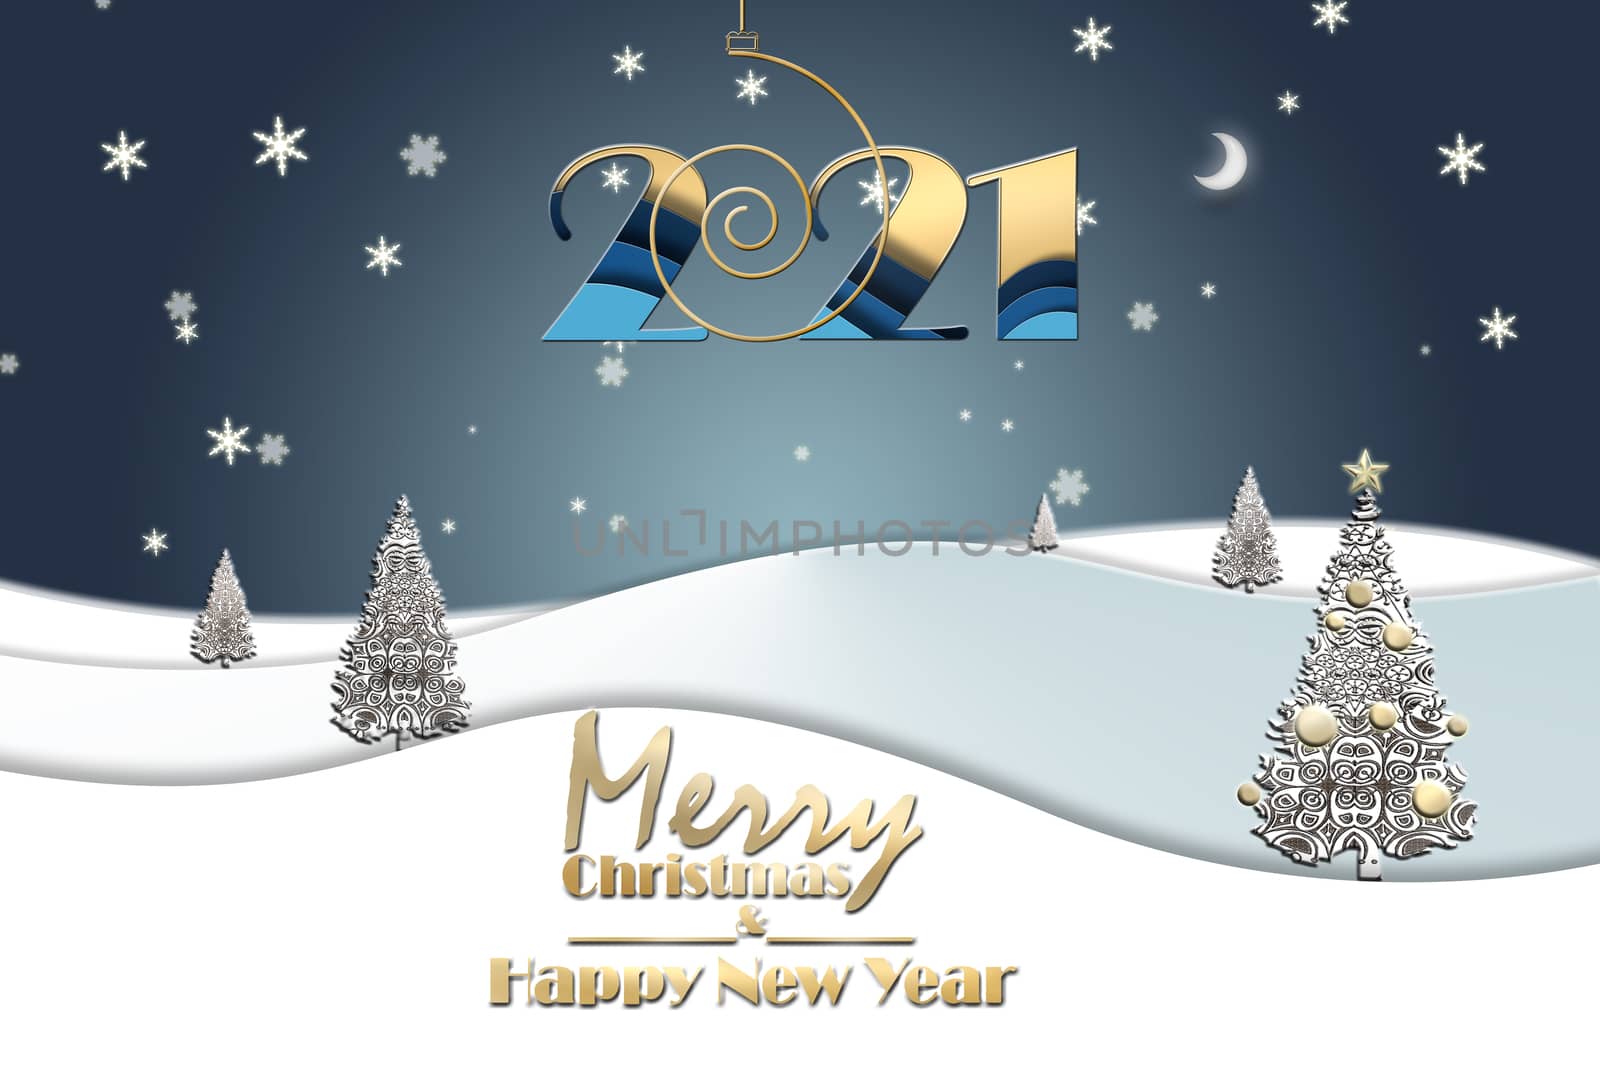 2021 Merry Christmas and Happy New year card in blue pastel colour by NelliPolk